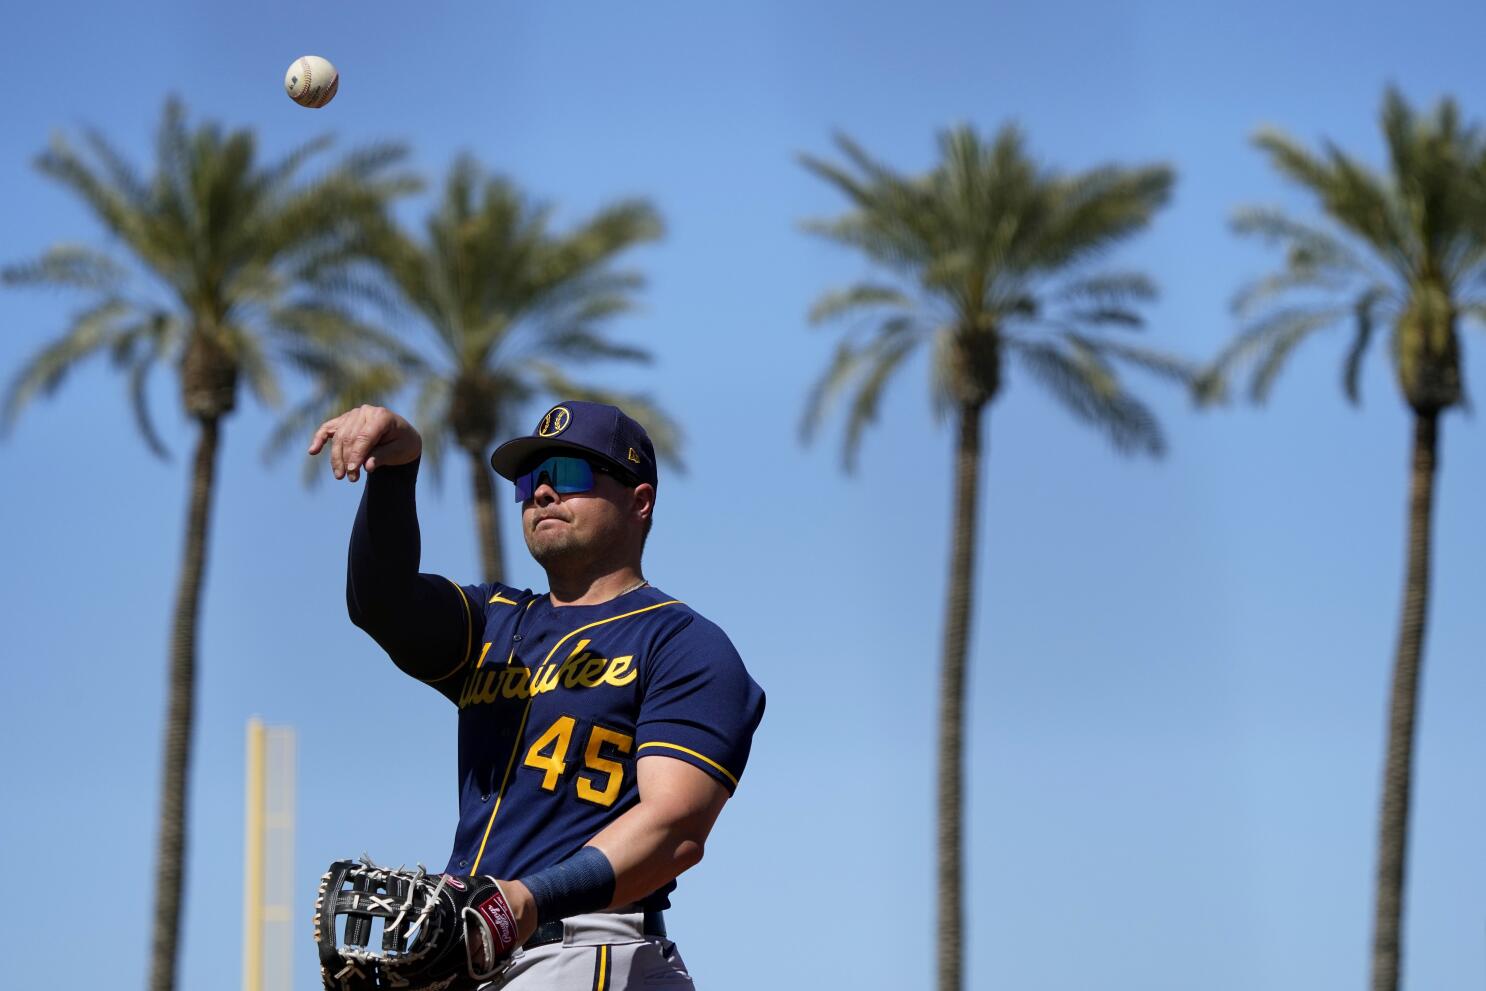 Padres roster review: Luke Voit - The San Diego Union-Tribune